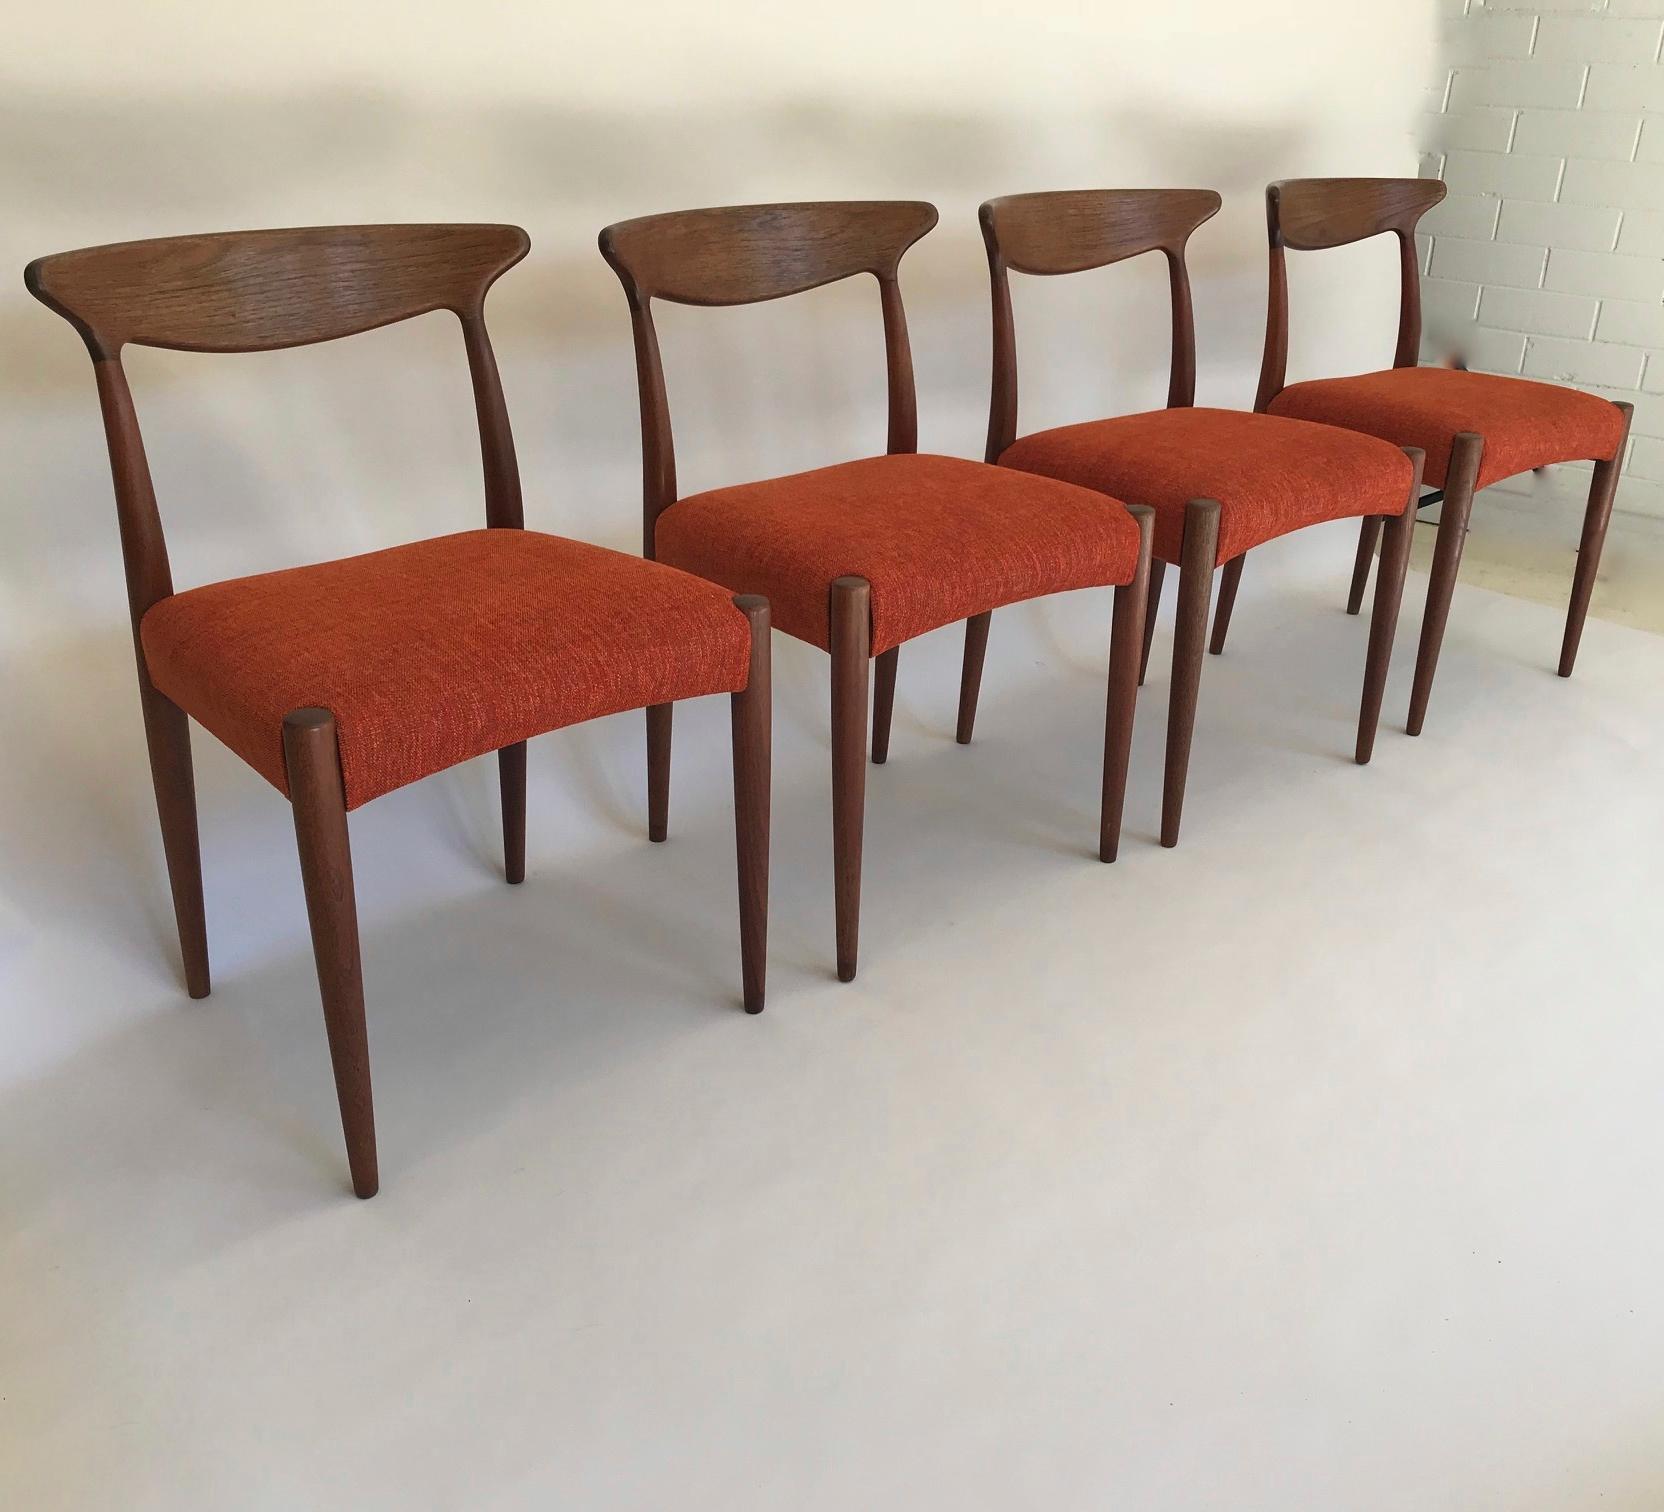 Set of four teak dining chairs designed by Arne Hovmand Olsen. 

Produced by Mogens Kold, Denmark. All chairs are in very good condition, they have been reupholstered in a burnt orange chenille fabric.

Makers plaque on underside of the